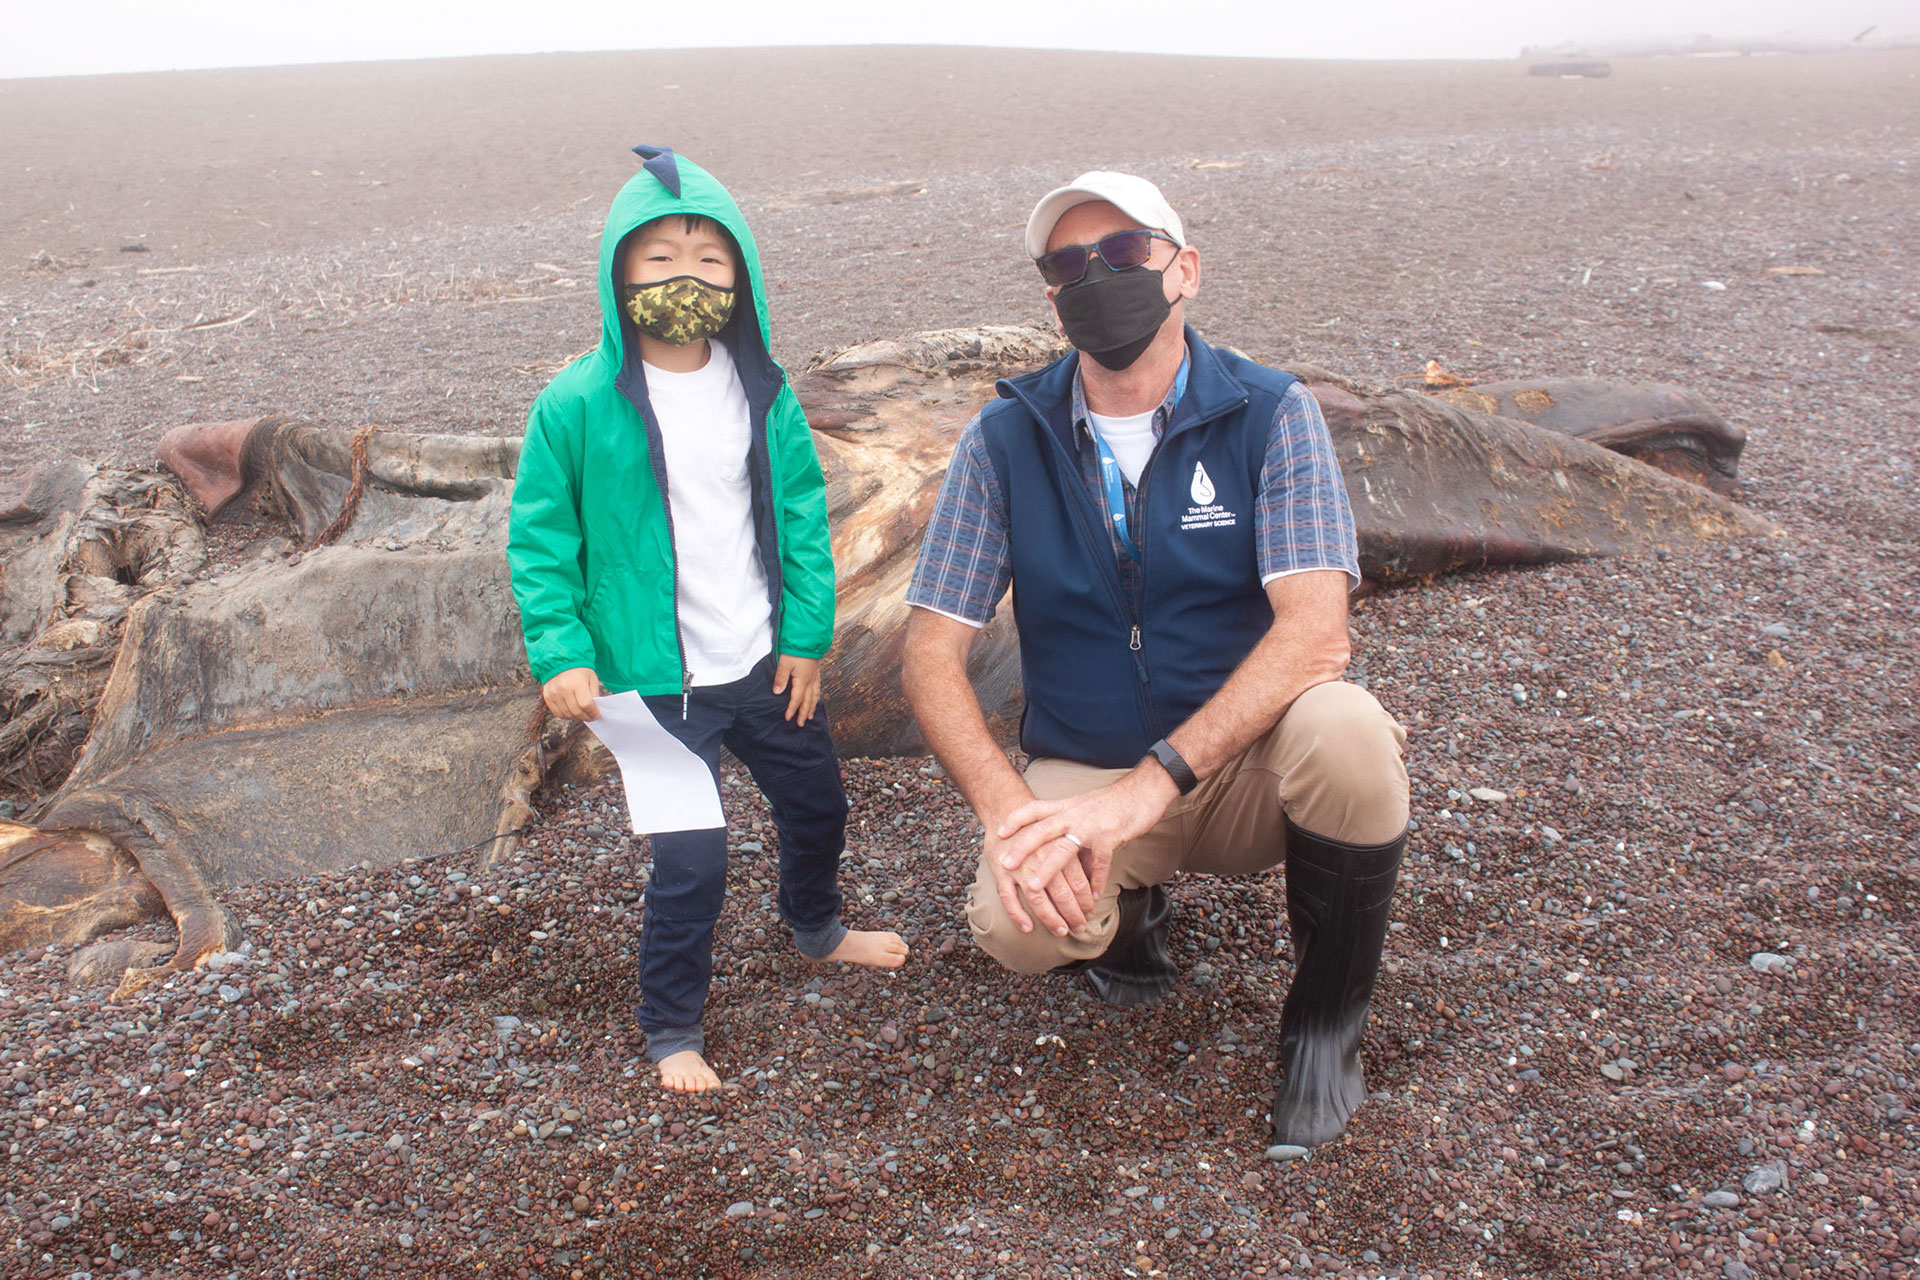 Five year old child in green jacket poses on a pebbly beach with older man in a blue vest, white baseball cap, and knee high rubber boots. Behind them is the decomposing carcass of a whale.